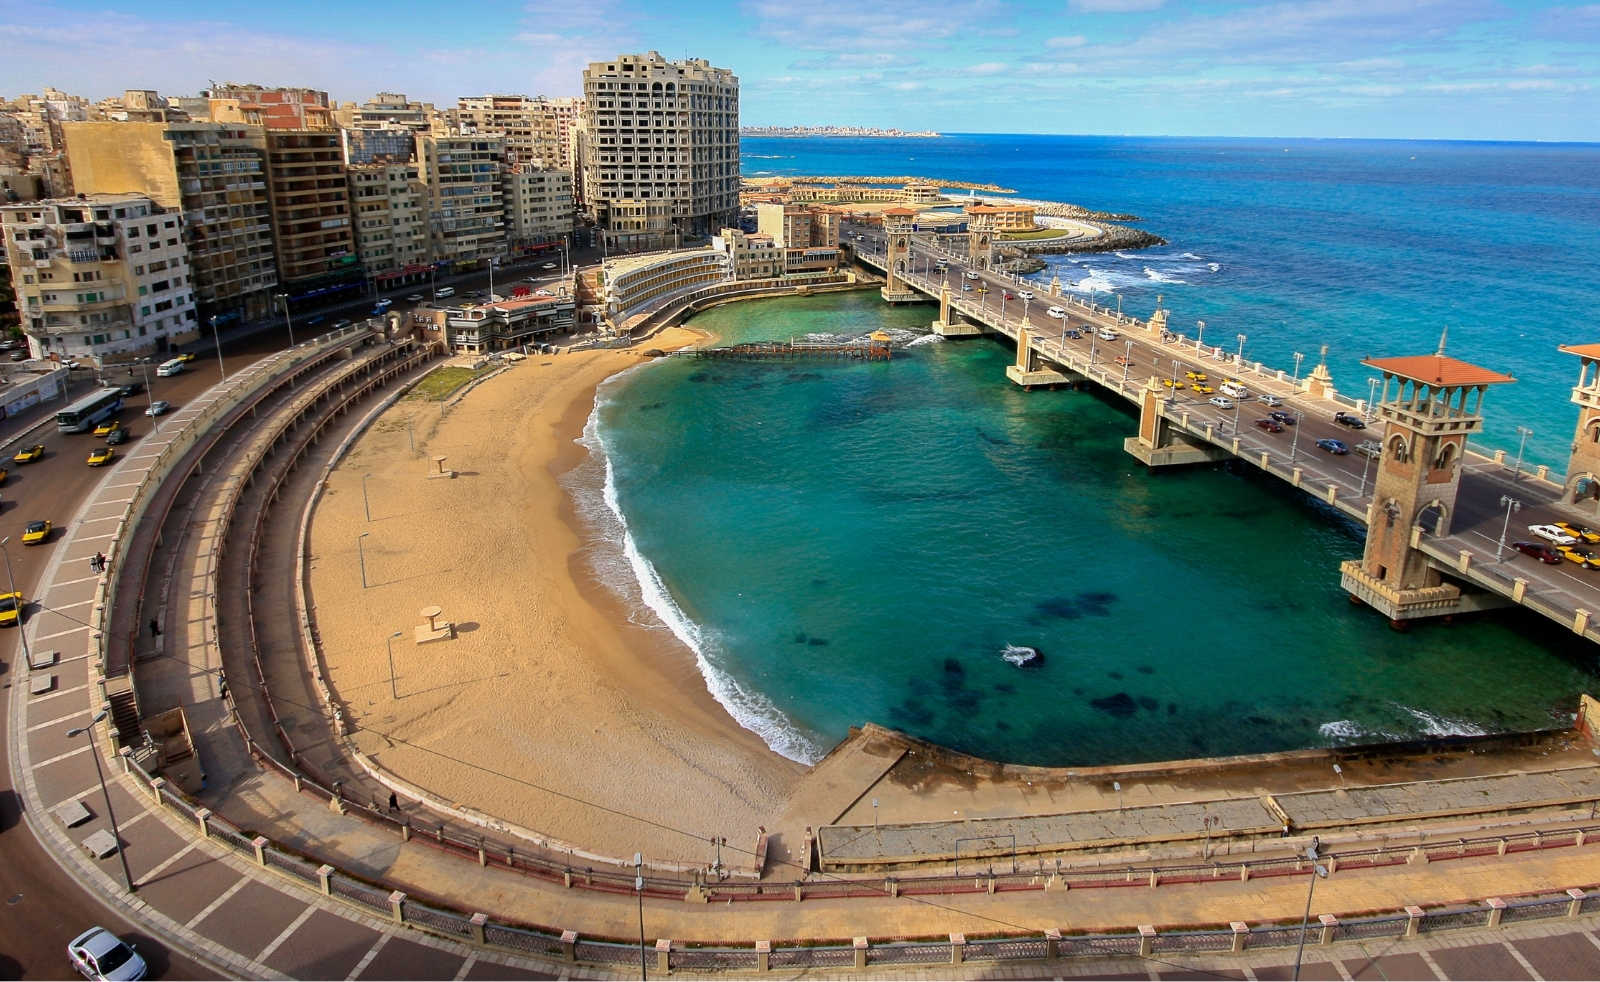 You Can Now Reserve Your Spot at One of Alexandria's Beaches Online